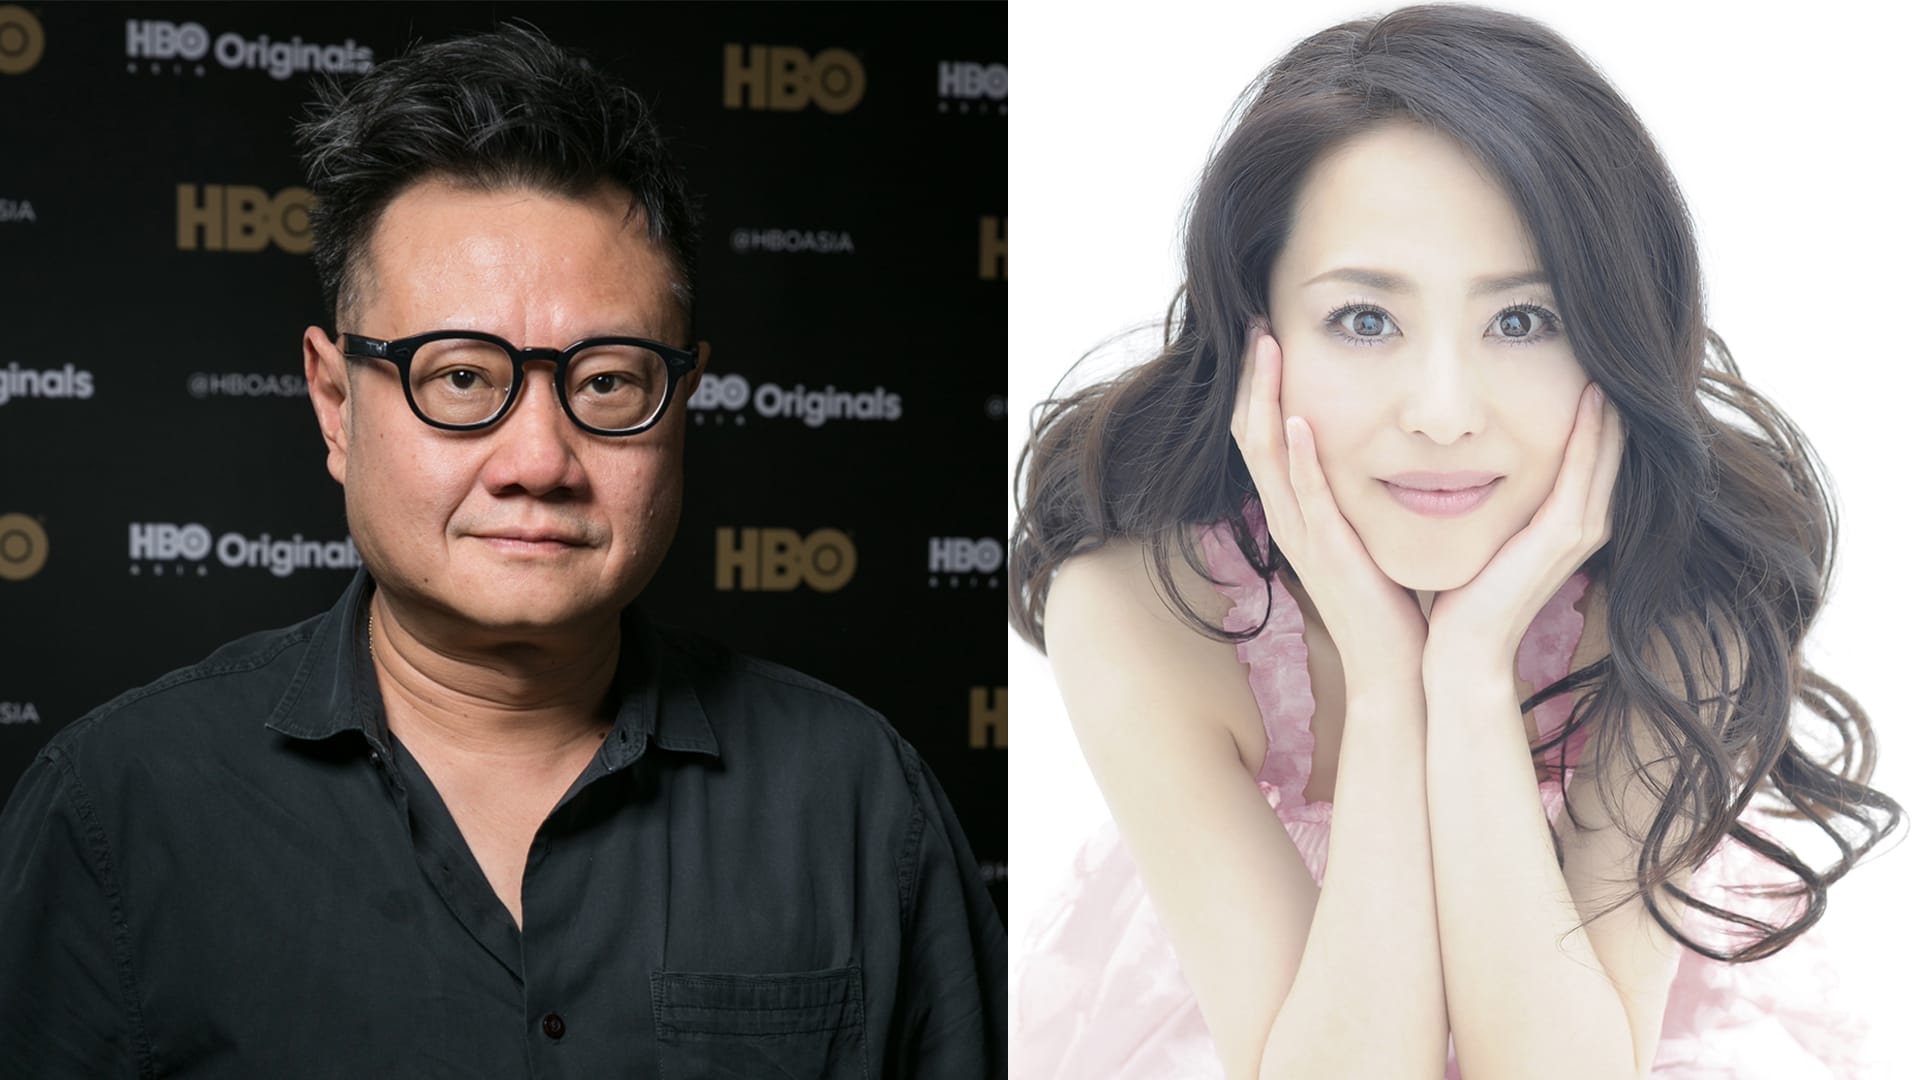 J-Pop Star Seiko Matsuda Doesn’t Like Horror But Eric Khoo Convinced Her To Direct An Episode For HBO Supernatural Series Folklore